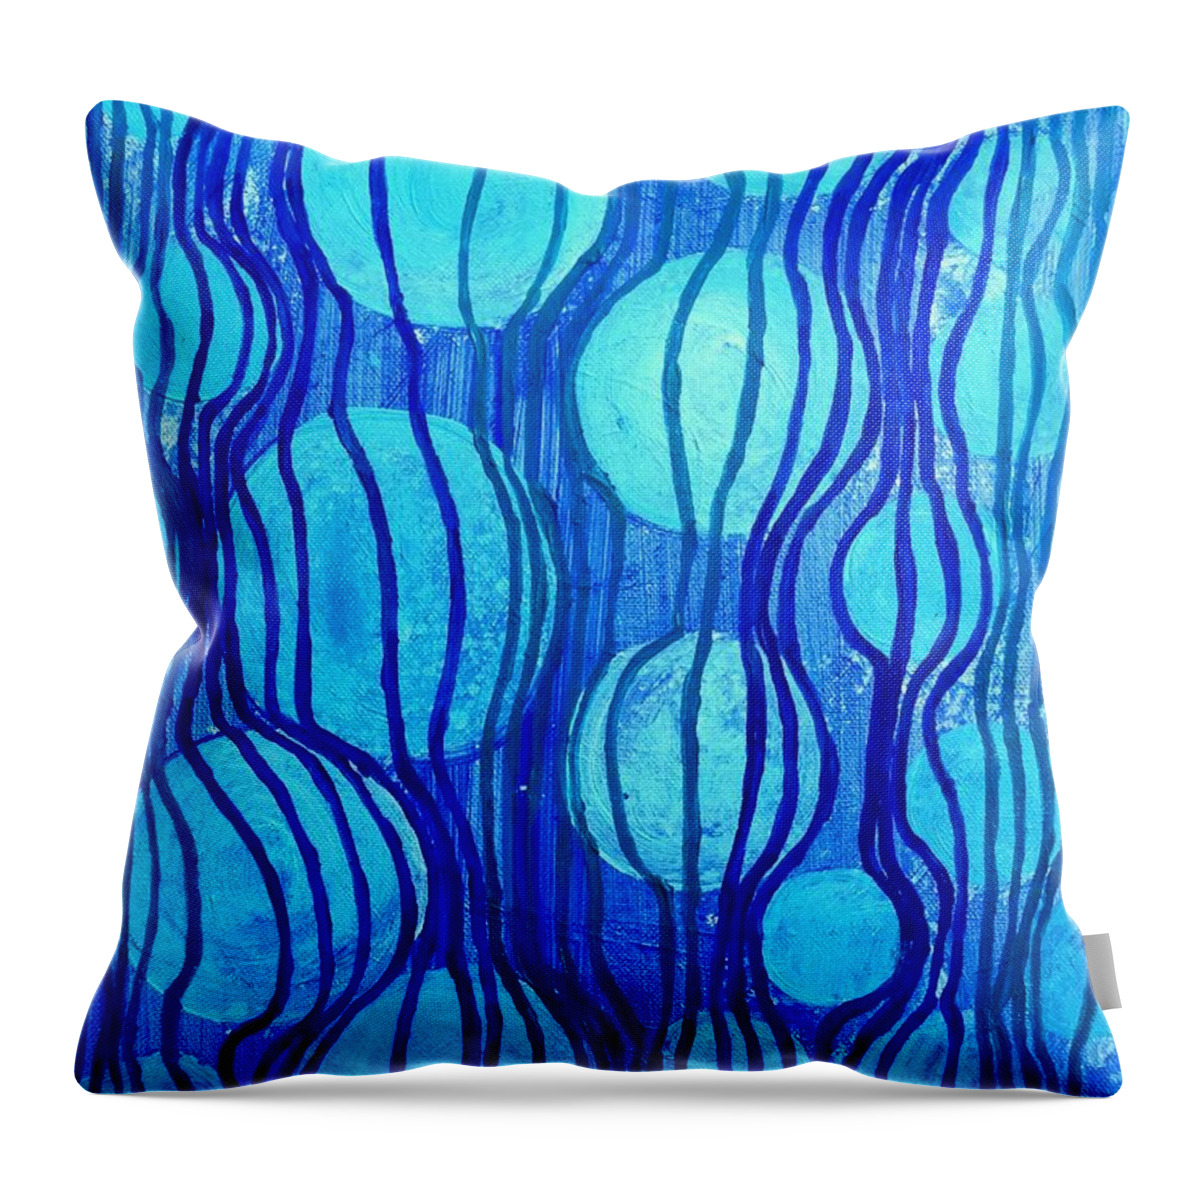 Pathway Throw Pillow featuring the painting Pathways Abstract 1 by Karen Jane Jones